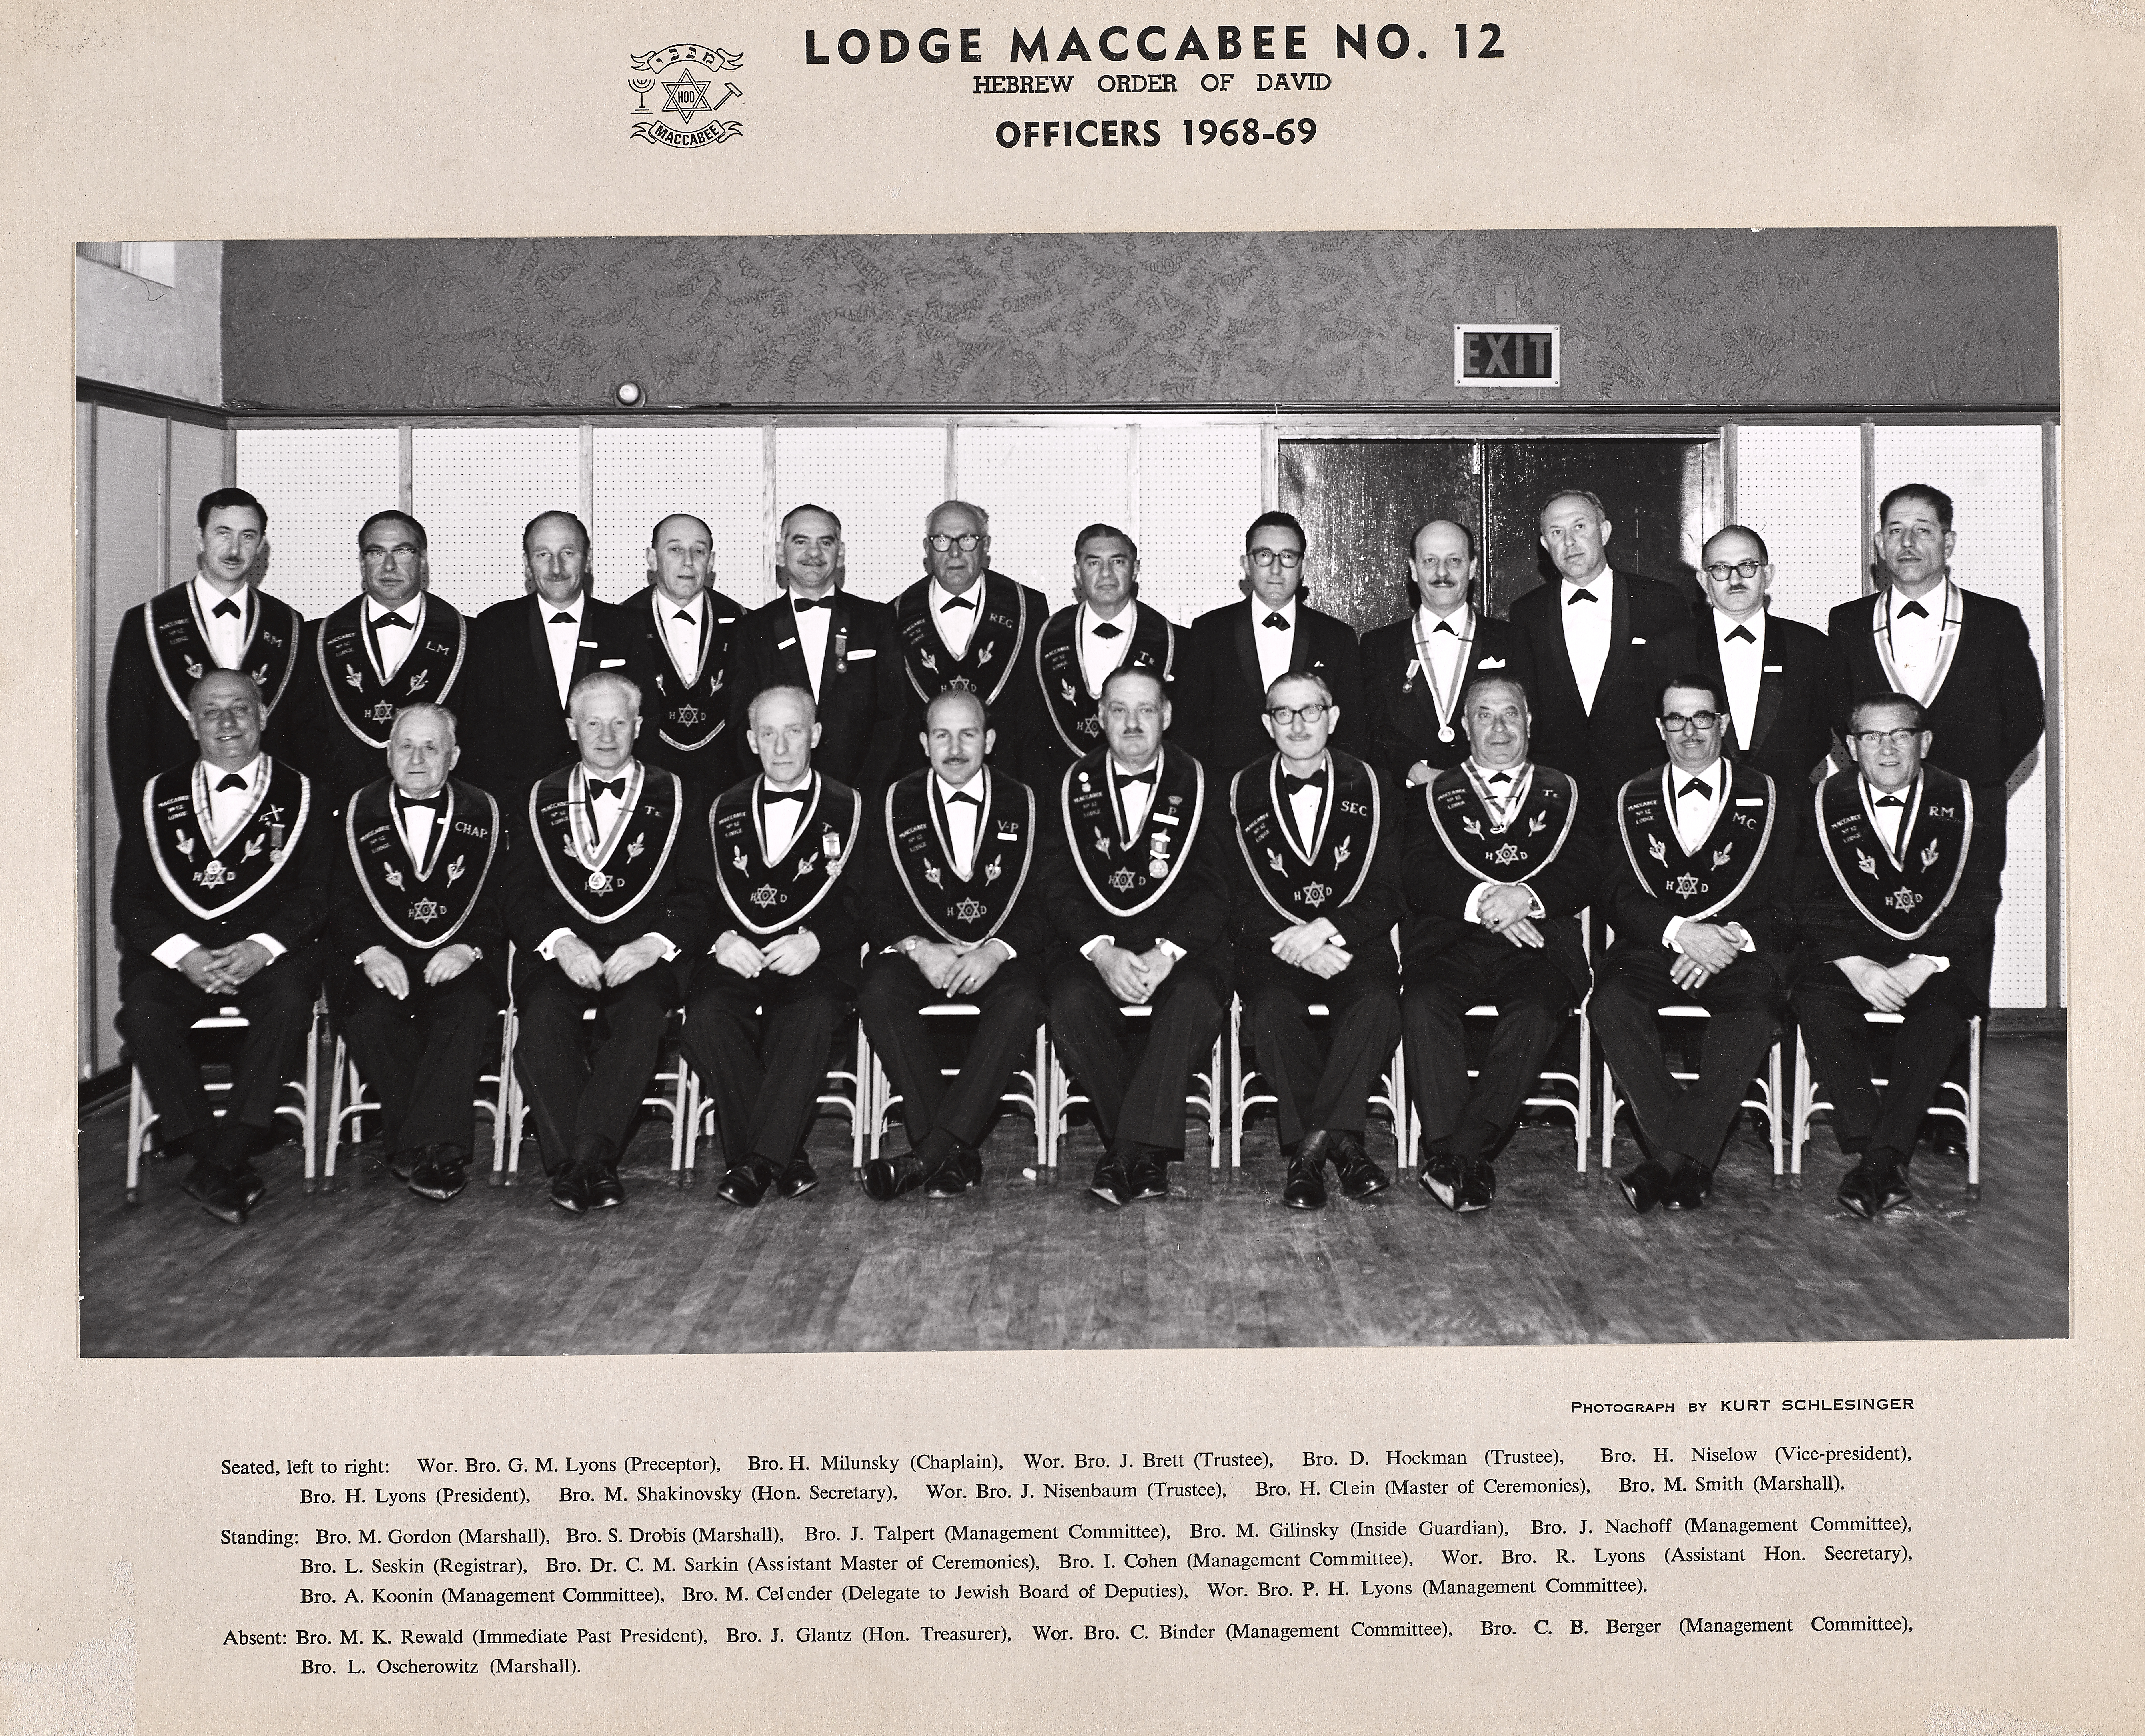 Lodge Maccabee Officers 1968 to 1969